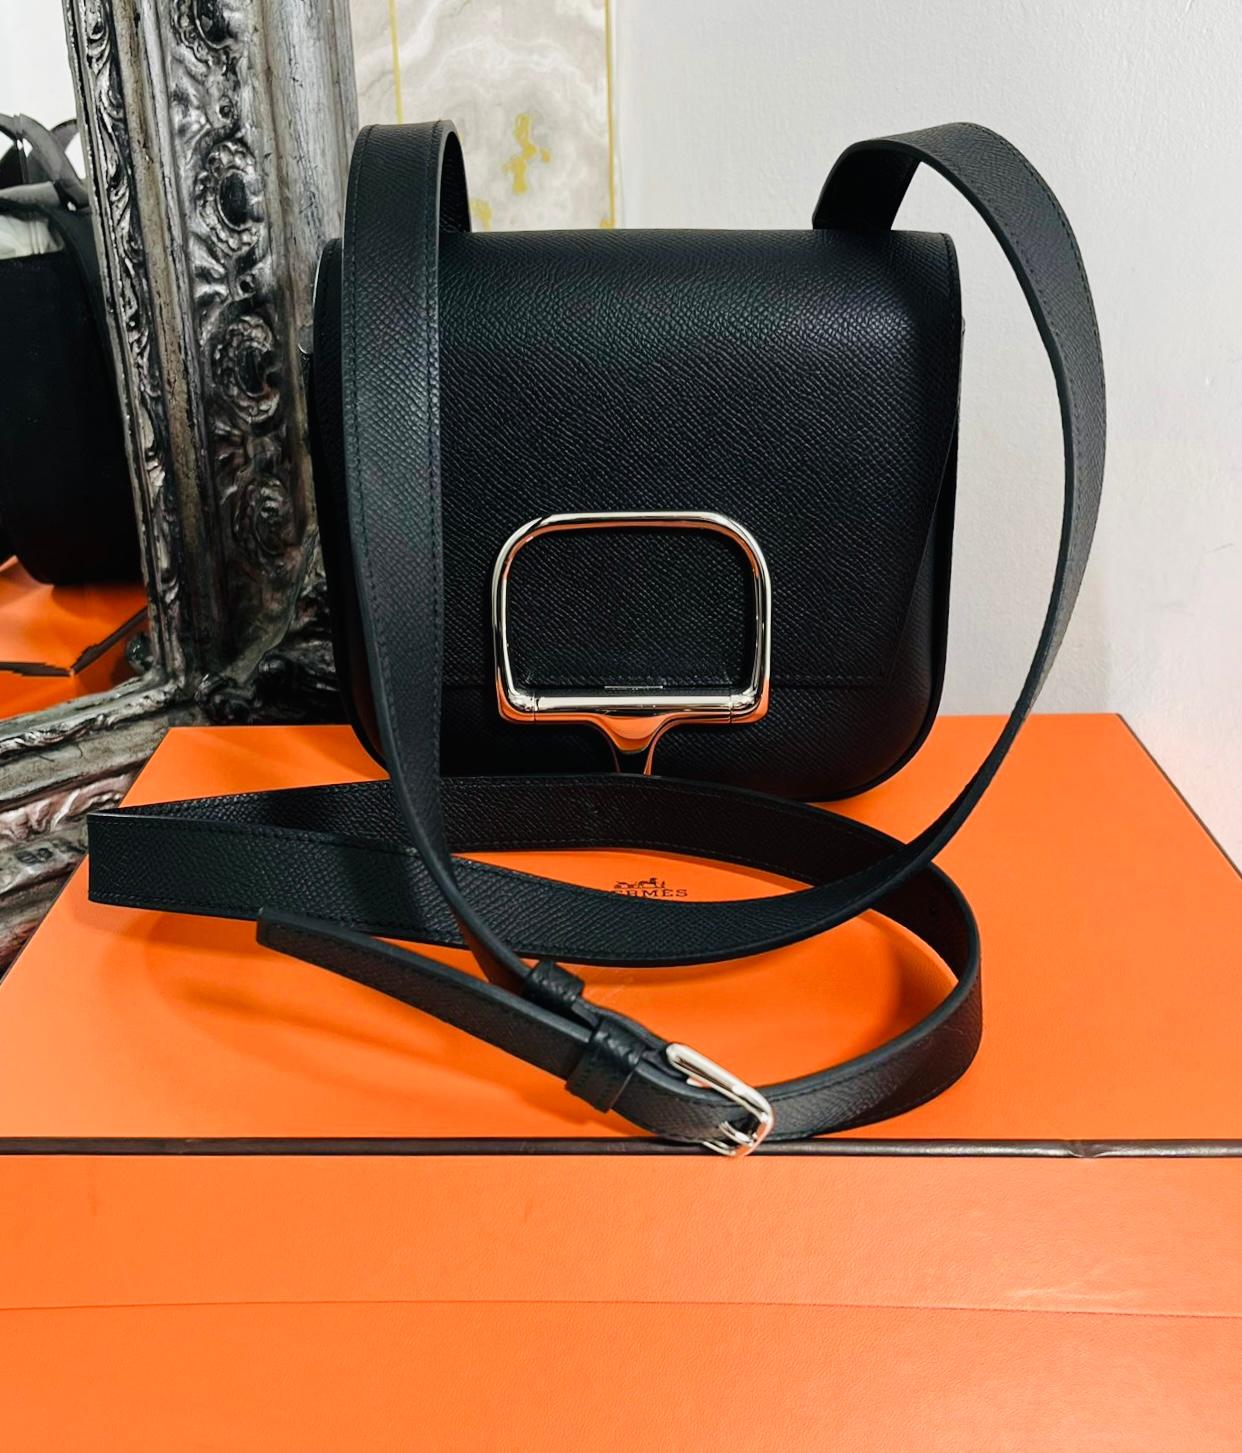 Brand New - Hermes Della Cavalleria Mini Epsom Leather Bag

Black, structured crossbody bag detailed with palladium plated clasp in the shape of half a Verdun horse bit, hugging the curve of the leather.

Featuring front flap, wide, adjustable